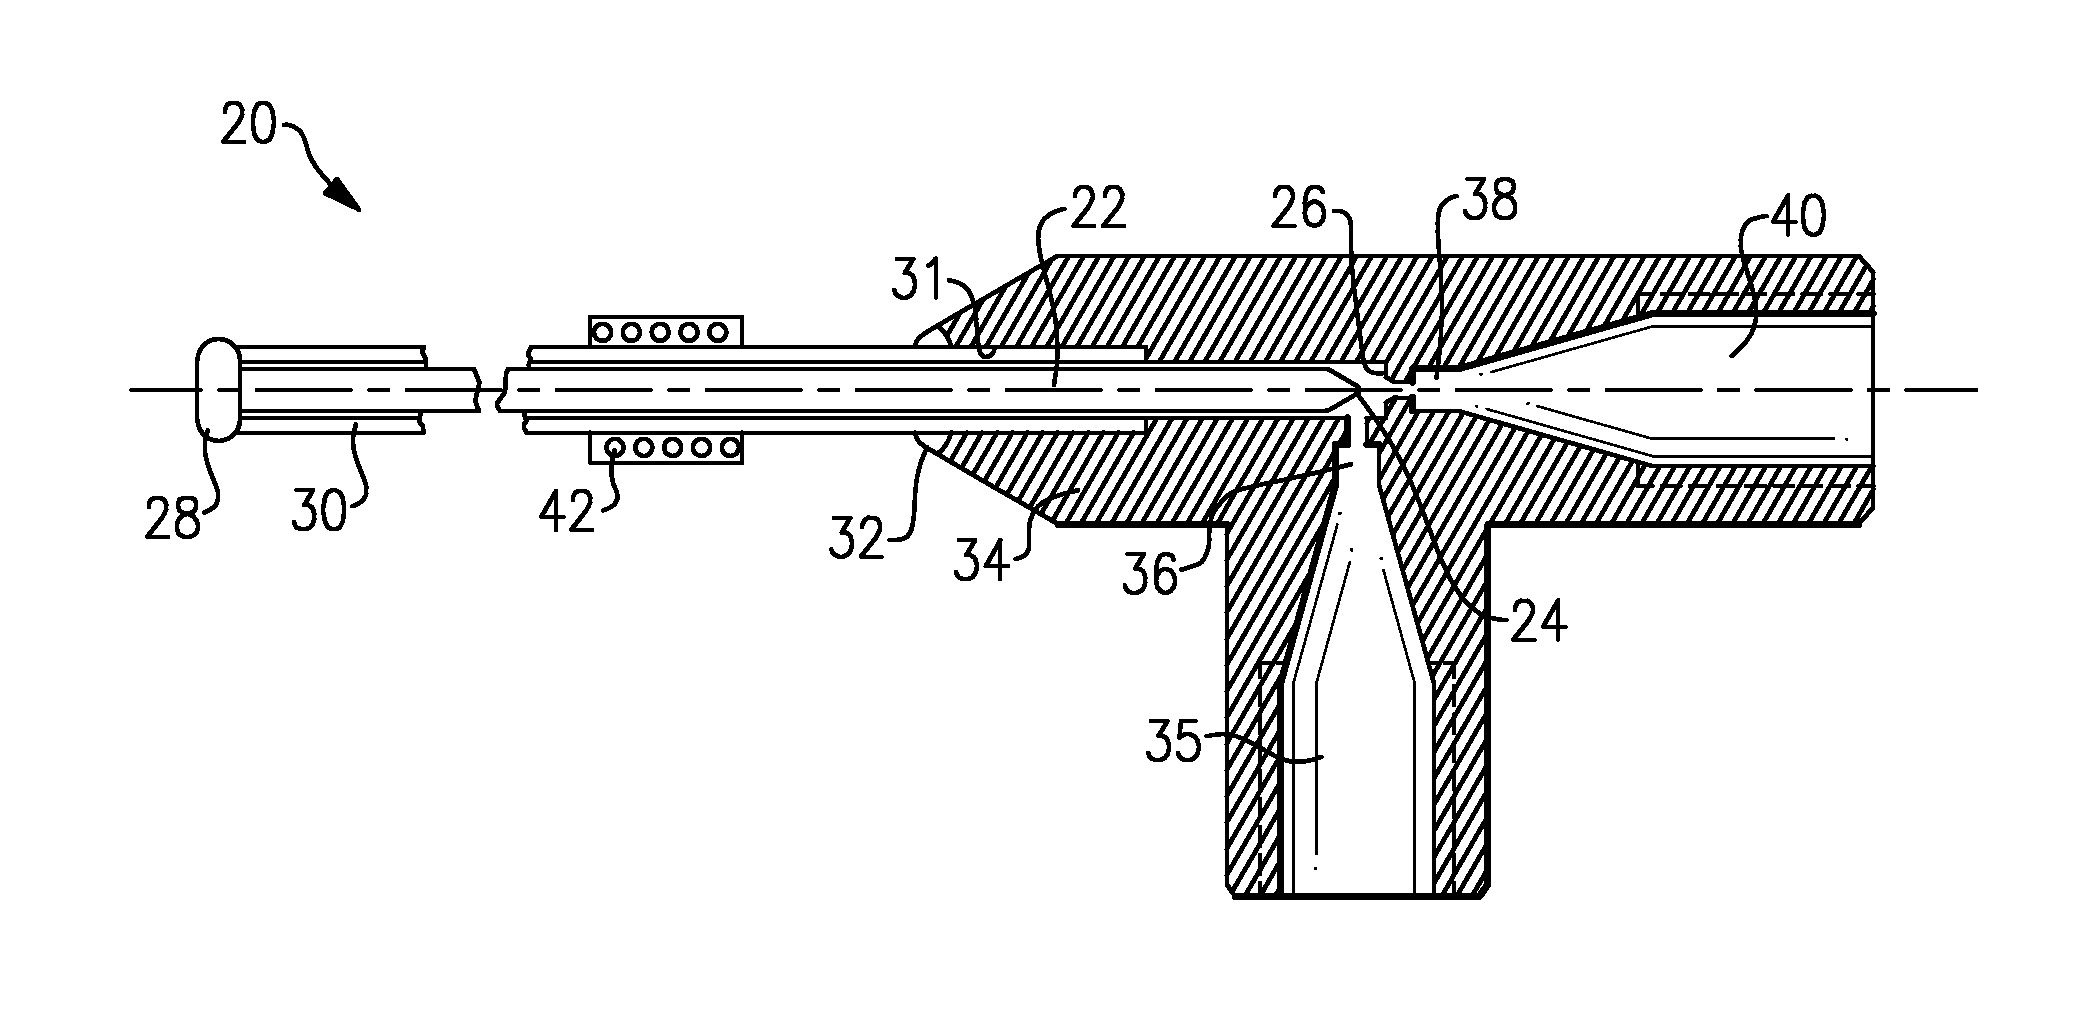 Thermally operated valve